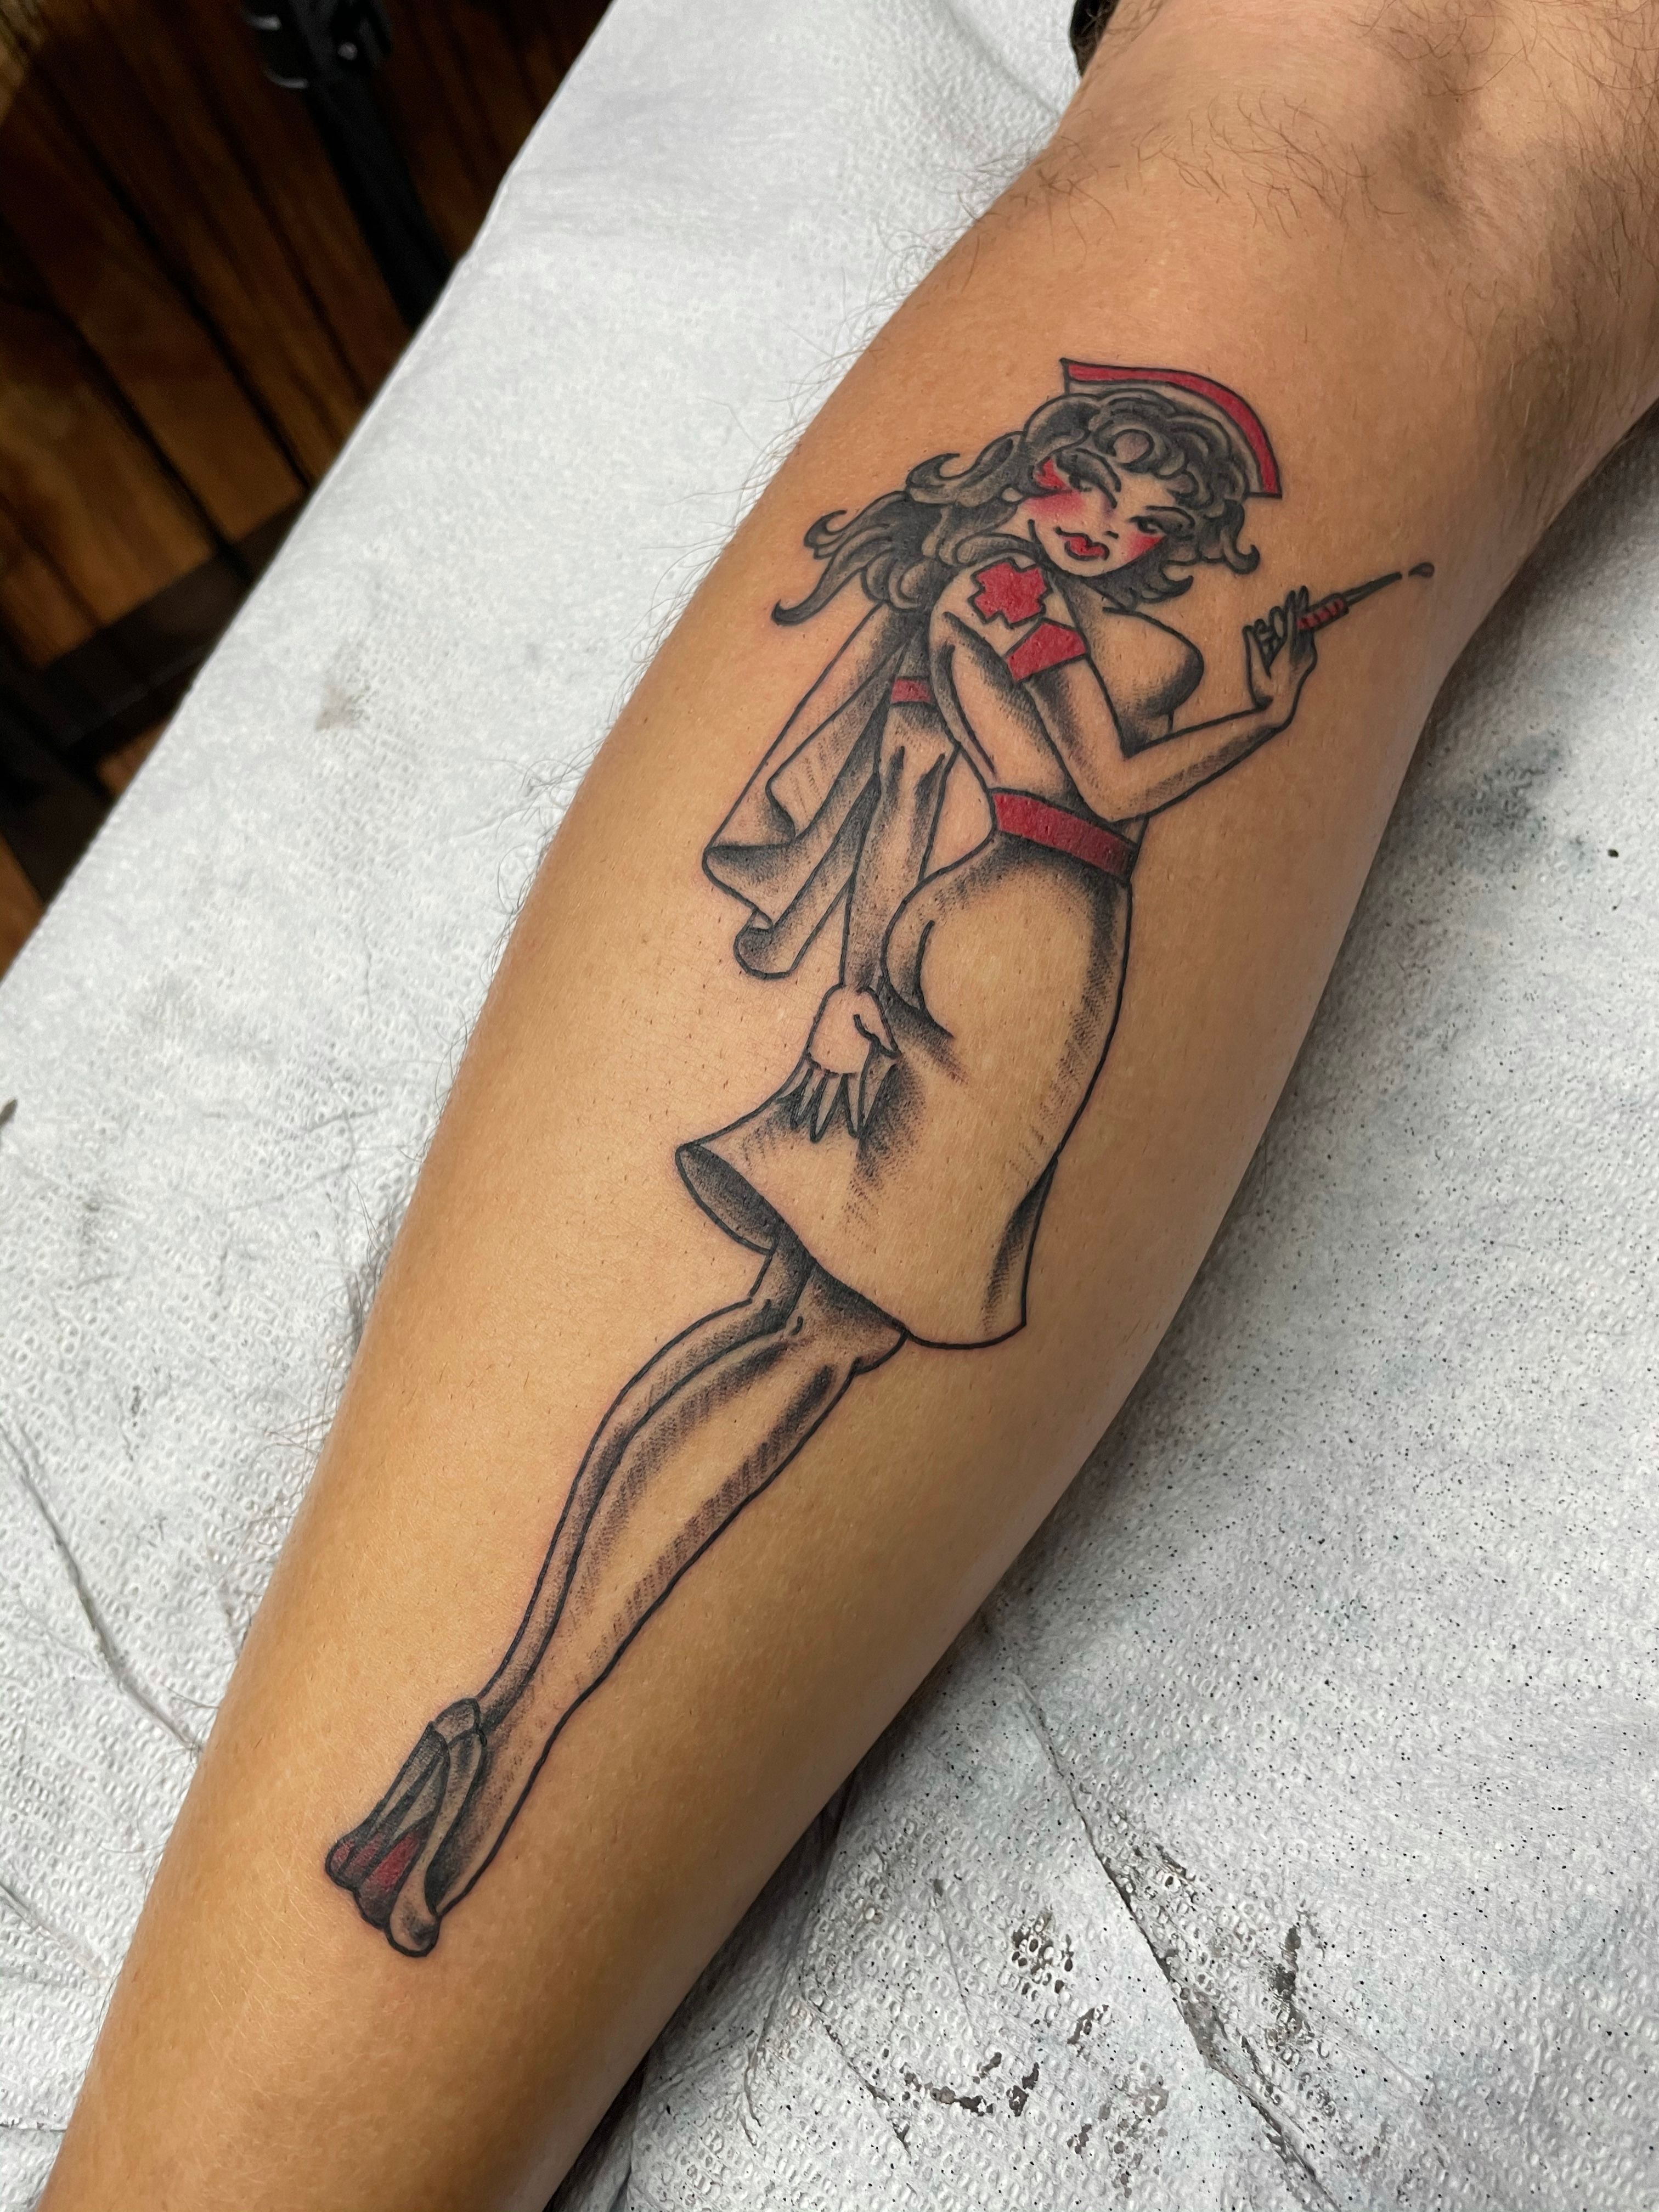 101 Best Pin Up Nurse Tattoo Ideas That Will Blow Your Mind!